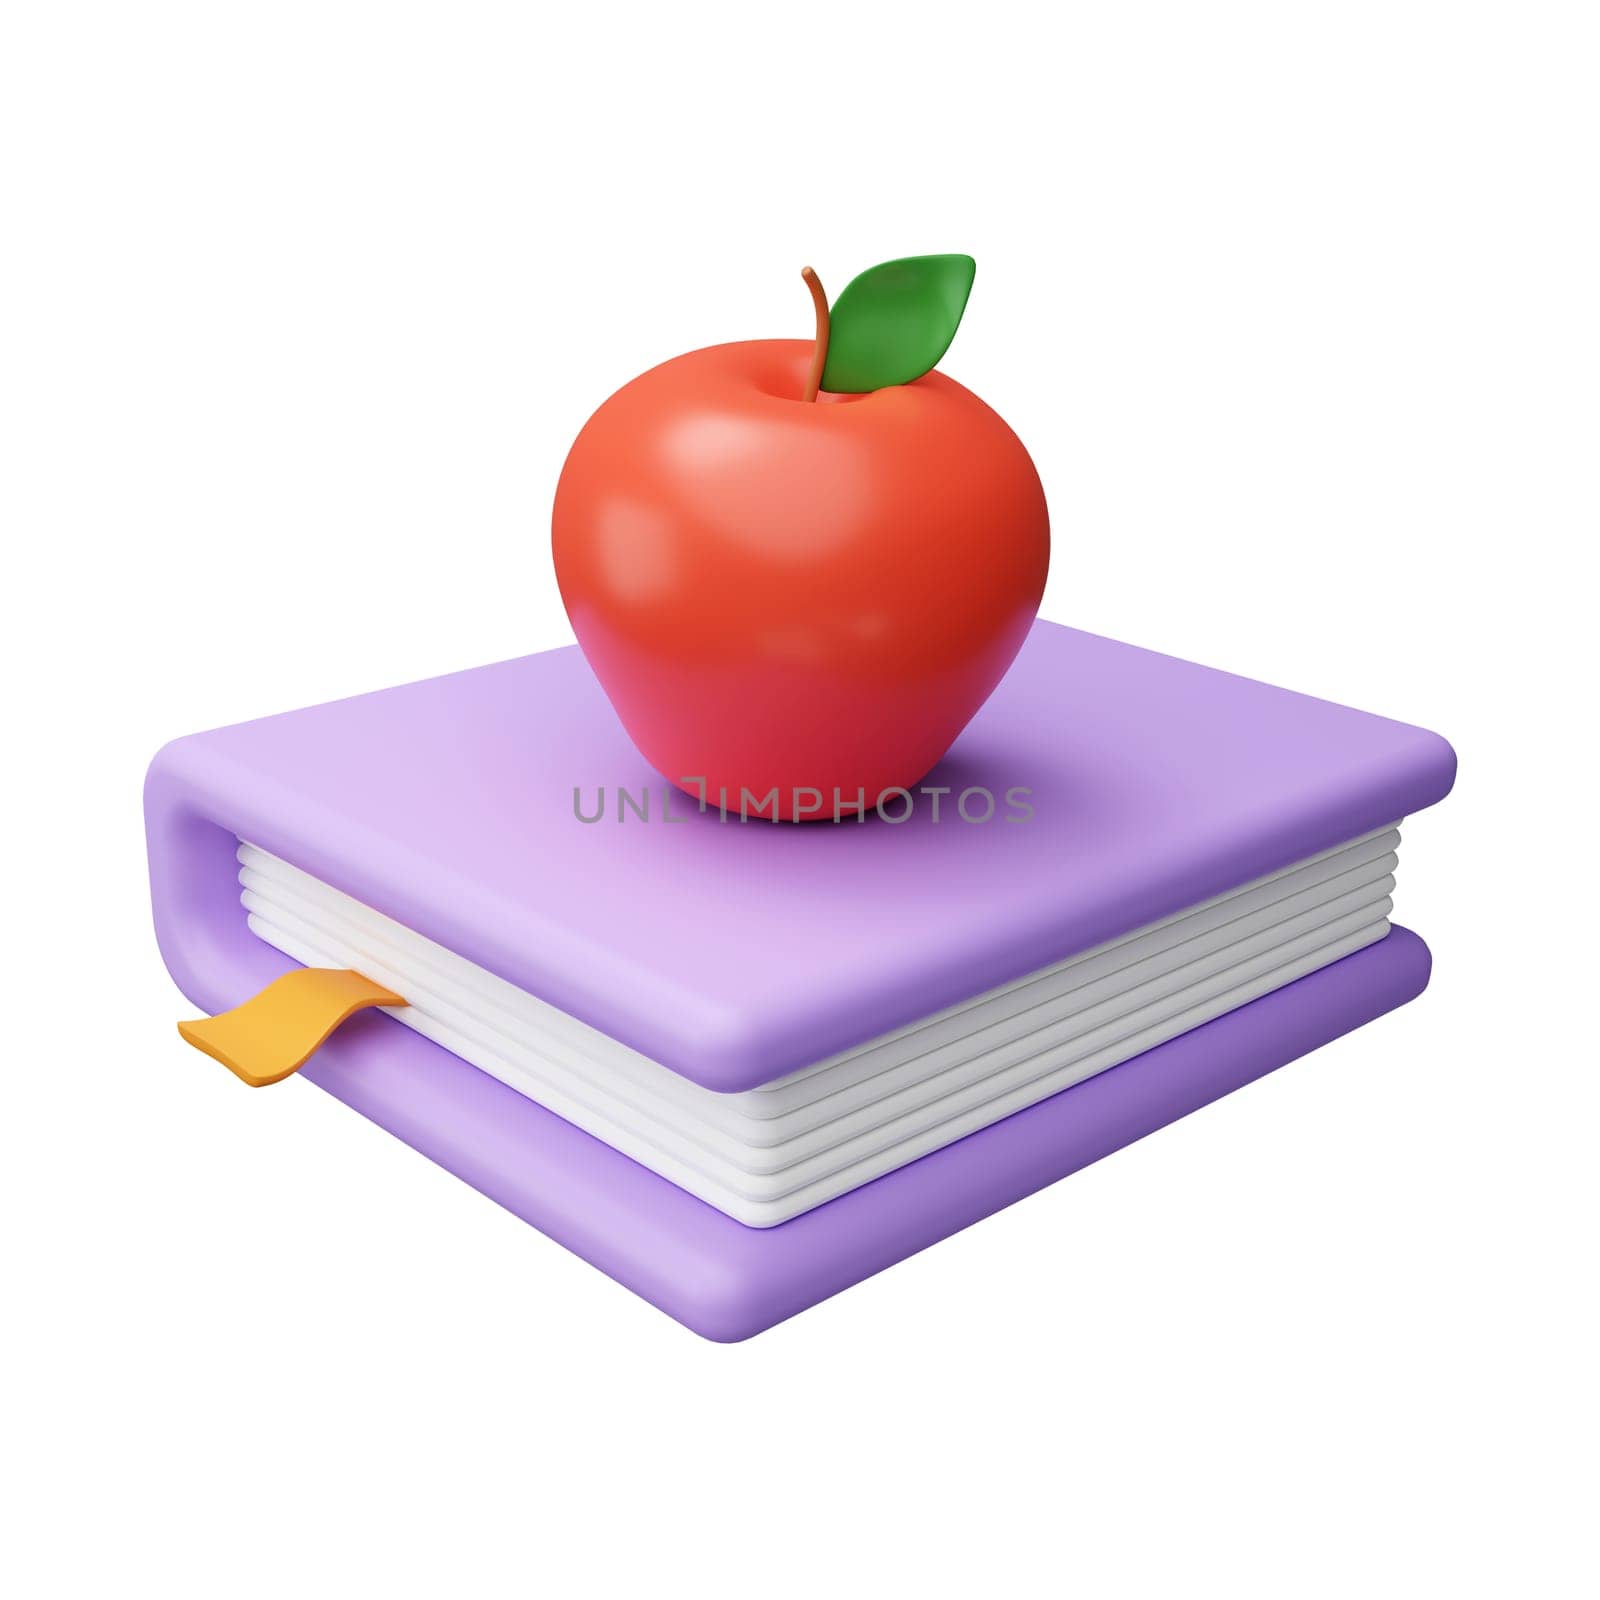 3d Minimal school icon concept, Apple on a stack of books. icon isolated on background, icon symbol clipping path. 3d render illustration.